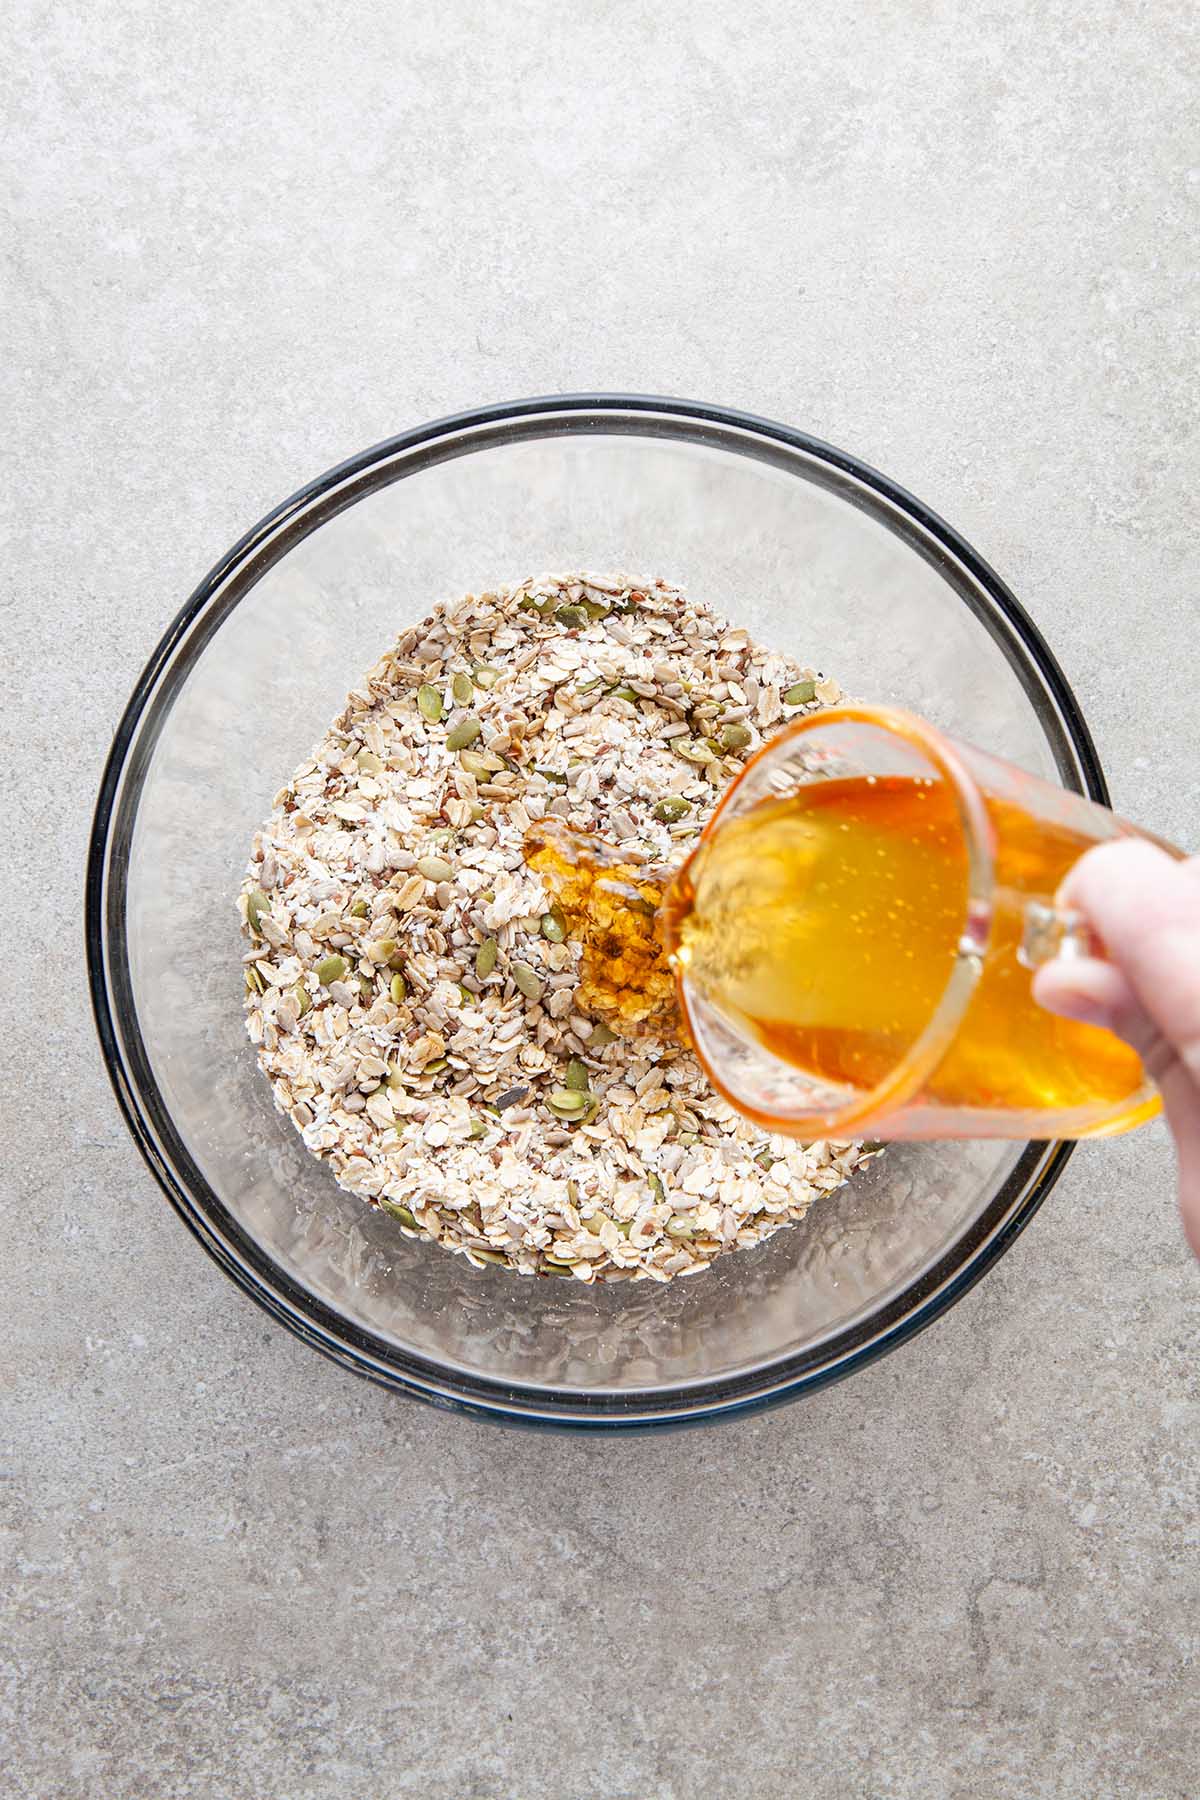 A hand pouring honey into a glass bowl of oats.